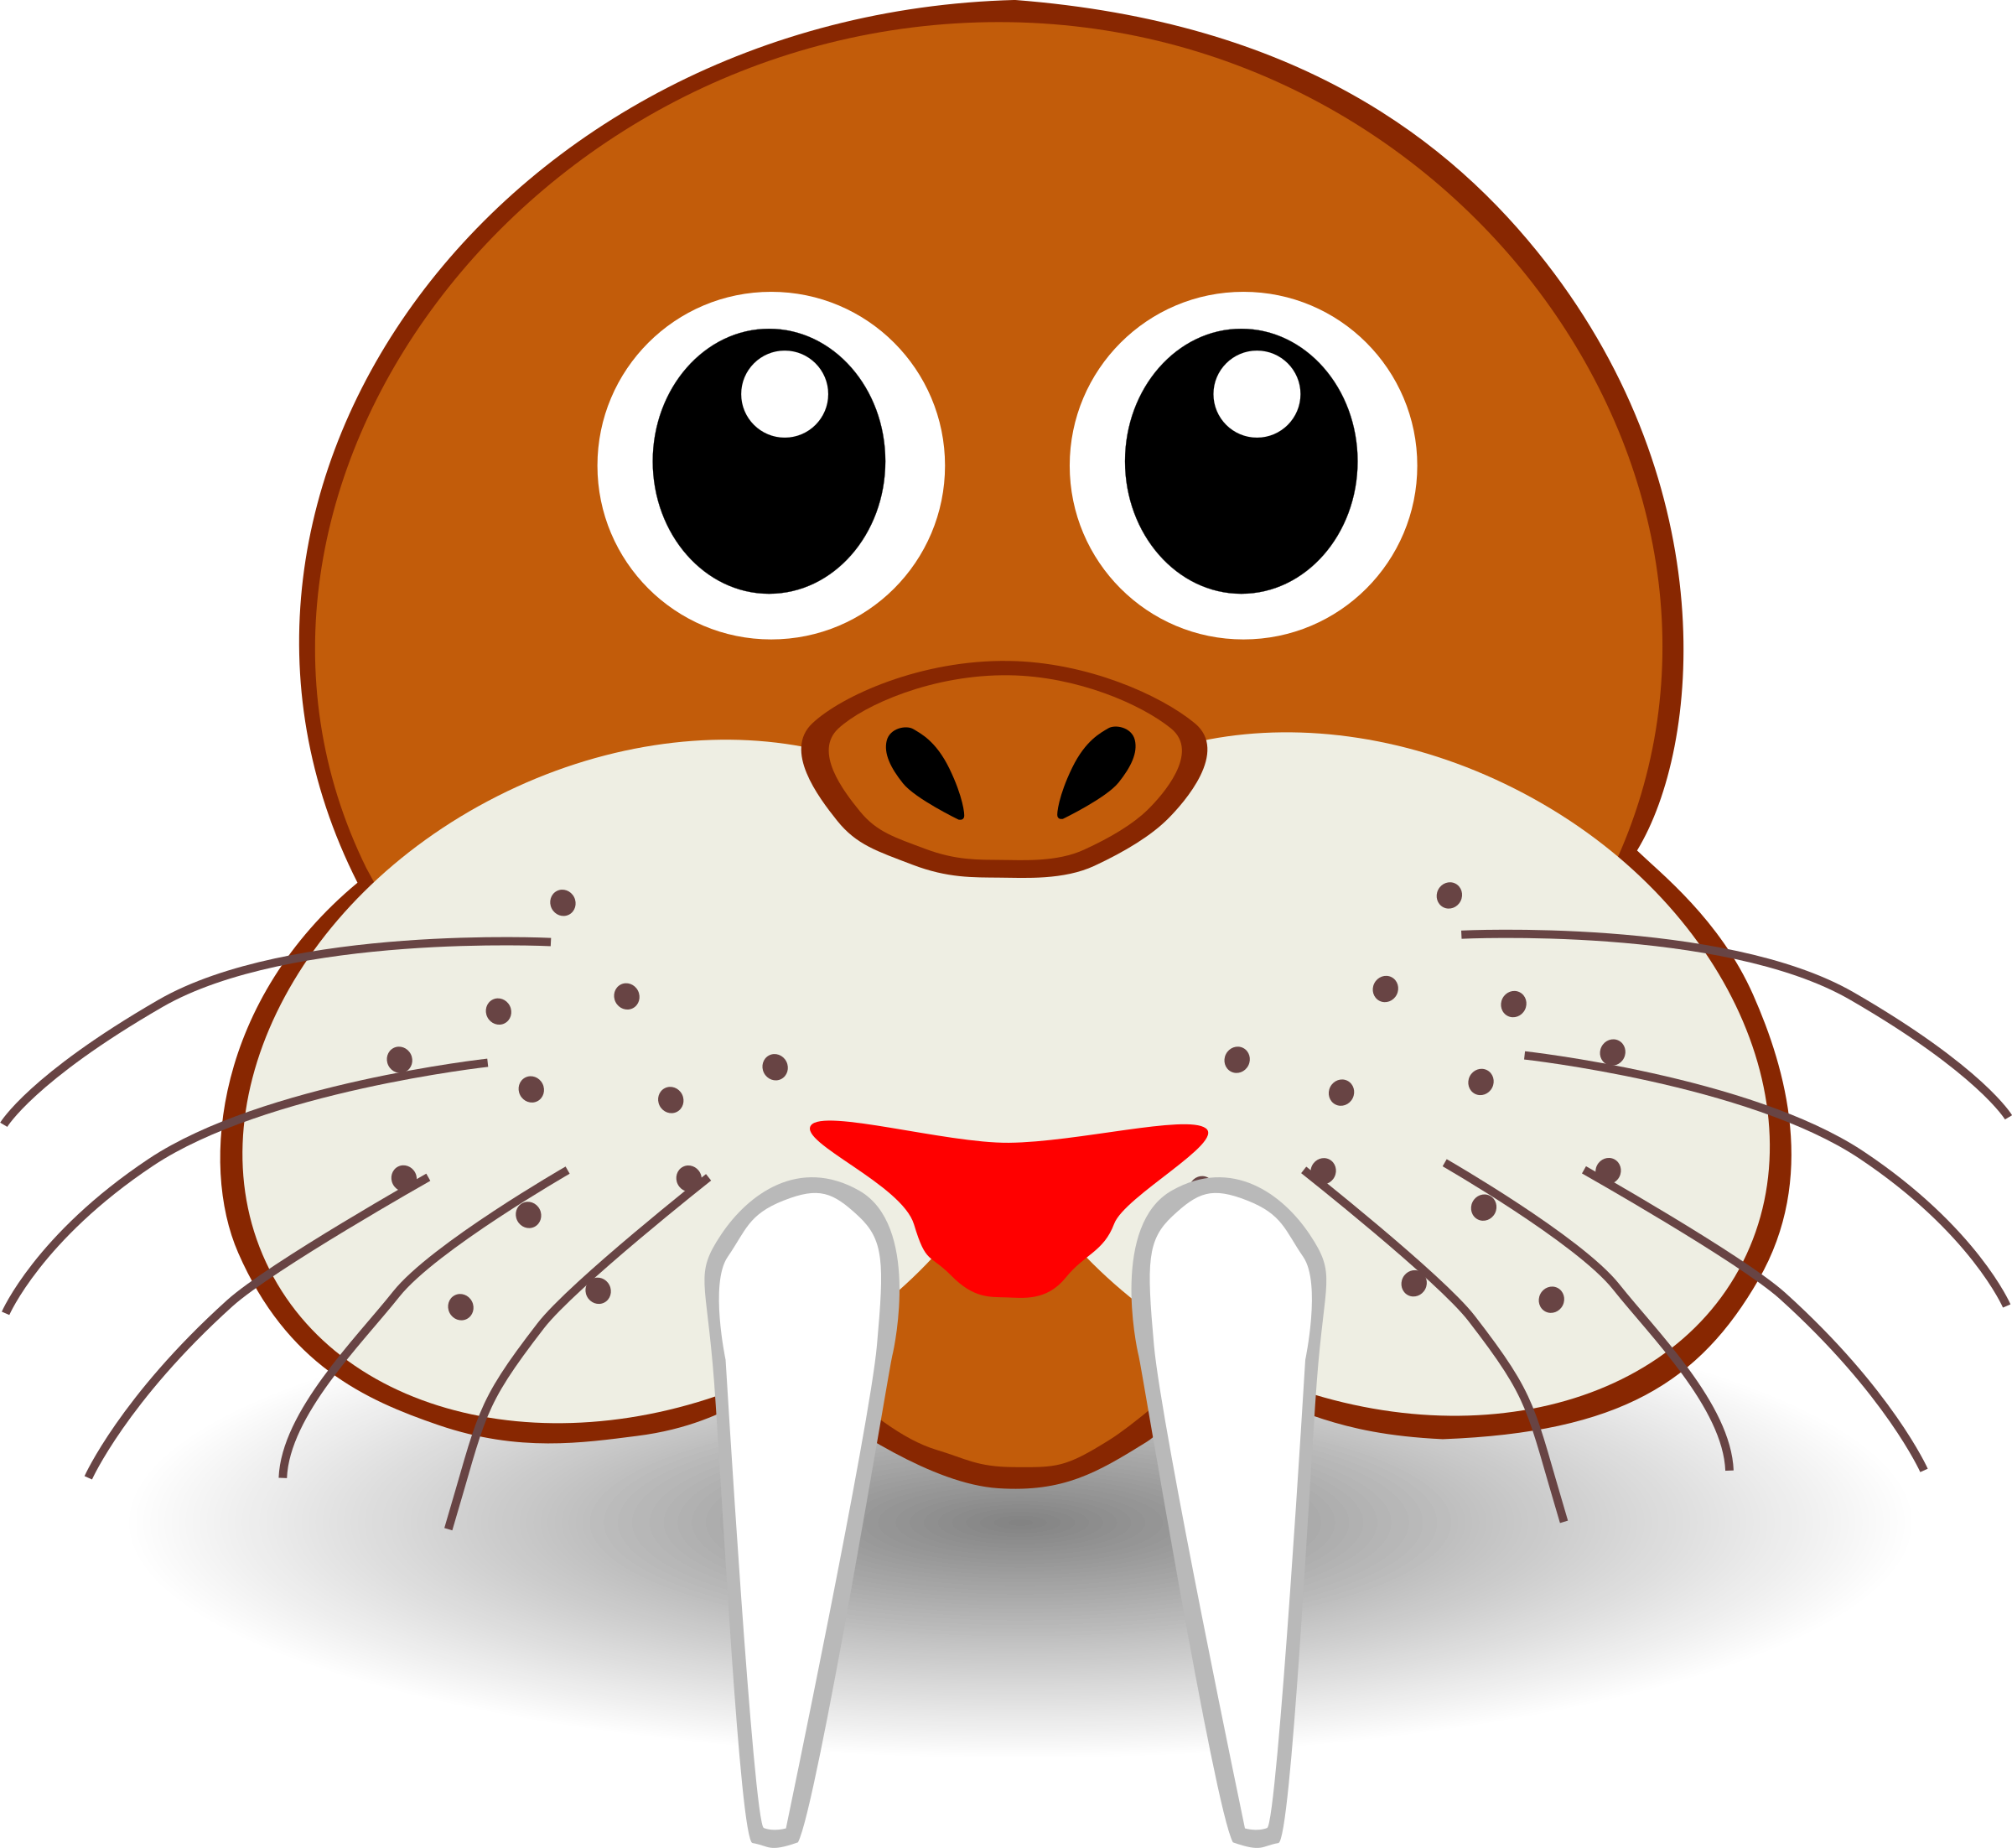 Funny face big image. Walrus clipart brown